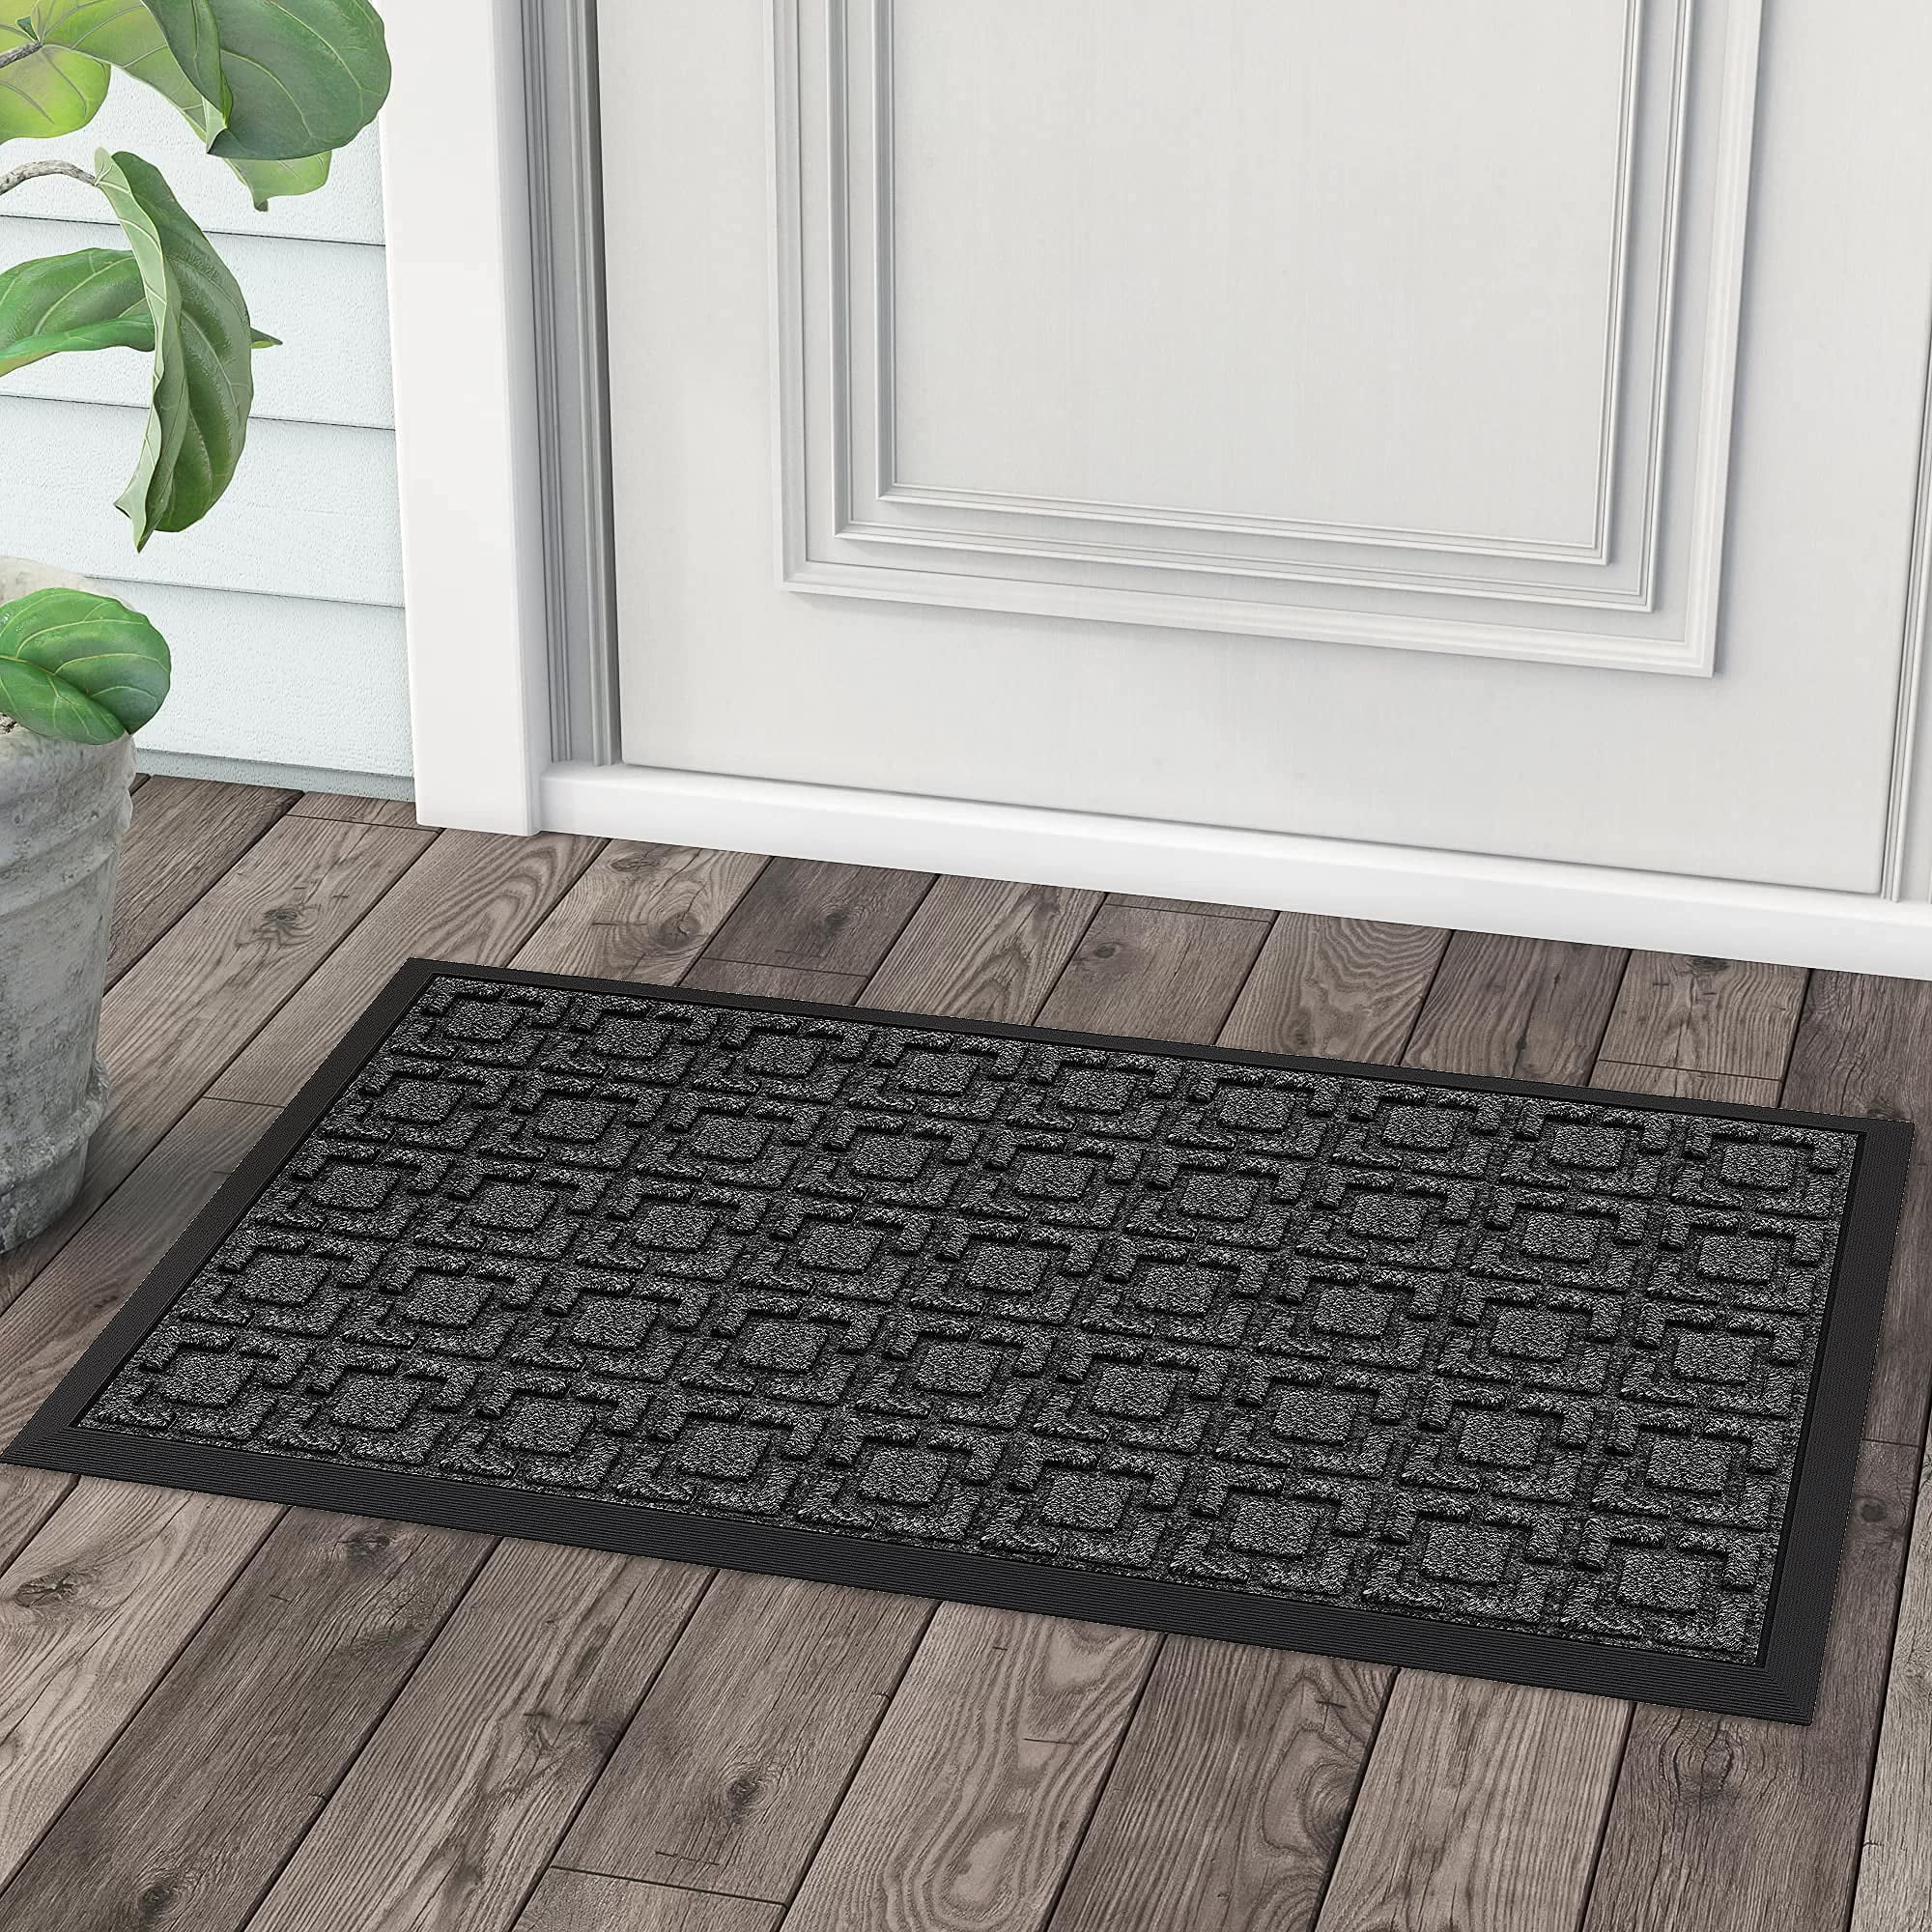 1 LuxUrux Welcome Mats Outdoor coco coir Doormat, with Heavy-Duty PVc  Backing - Natural - Perfect colorSizing for OutdoorI